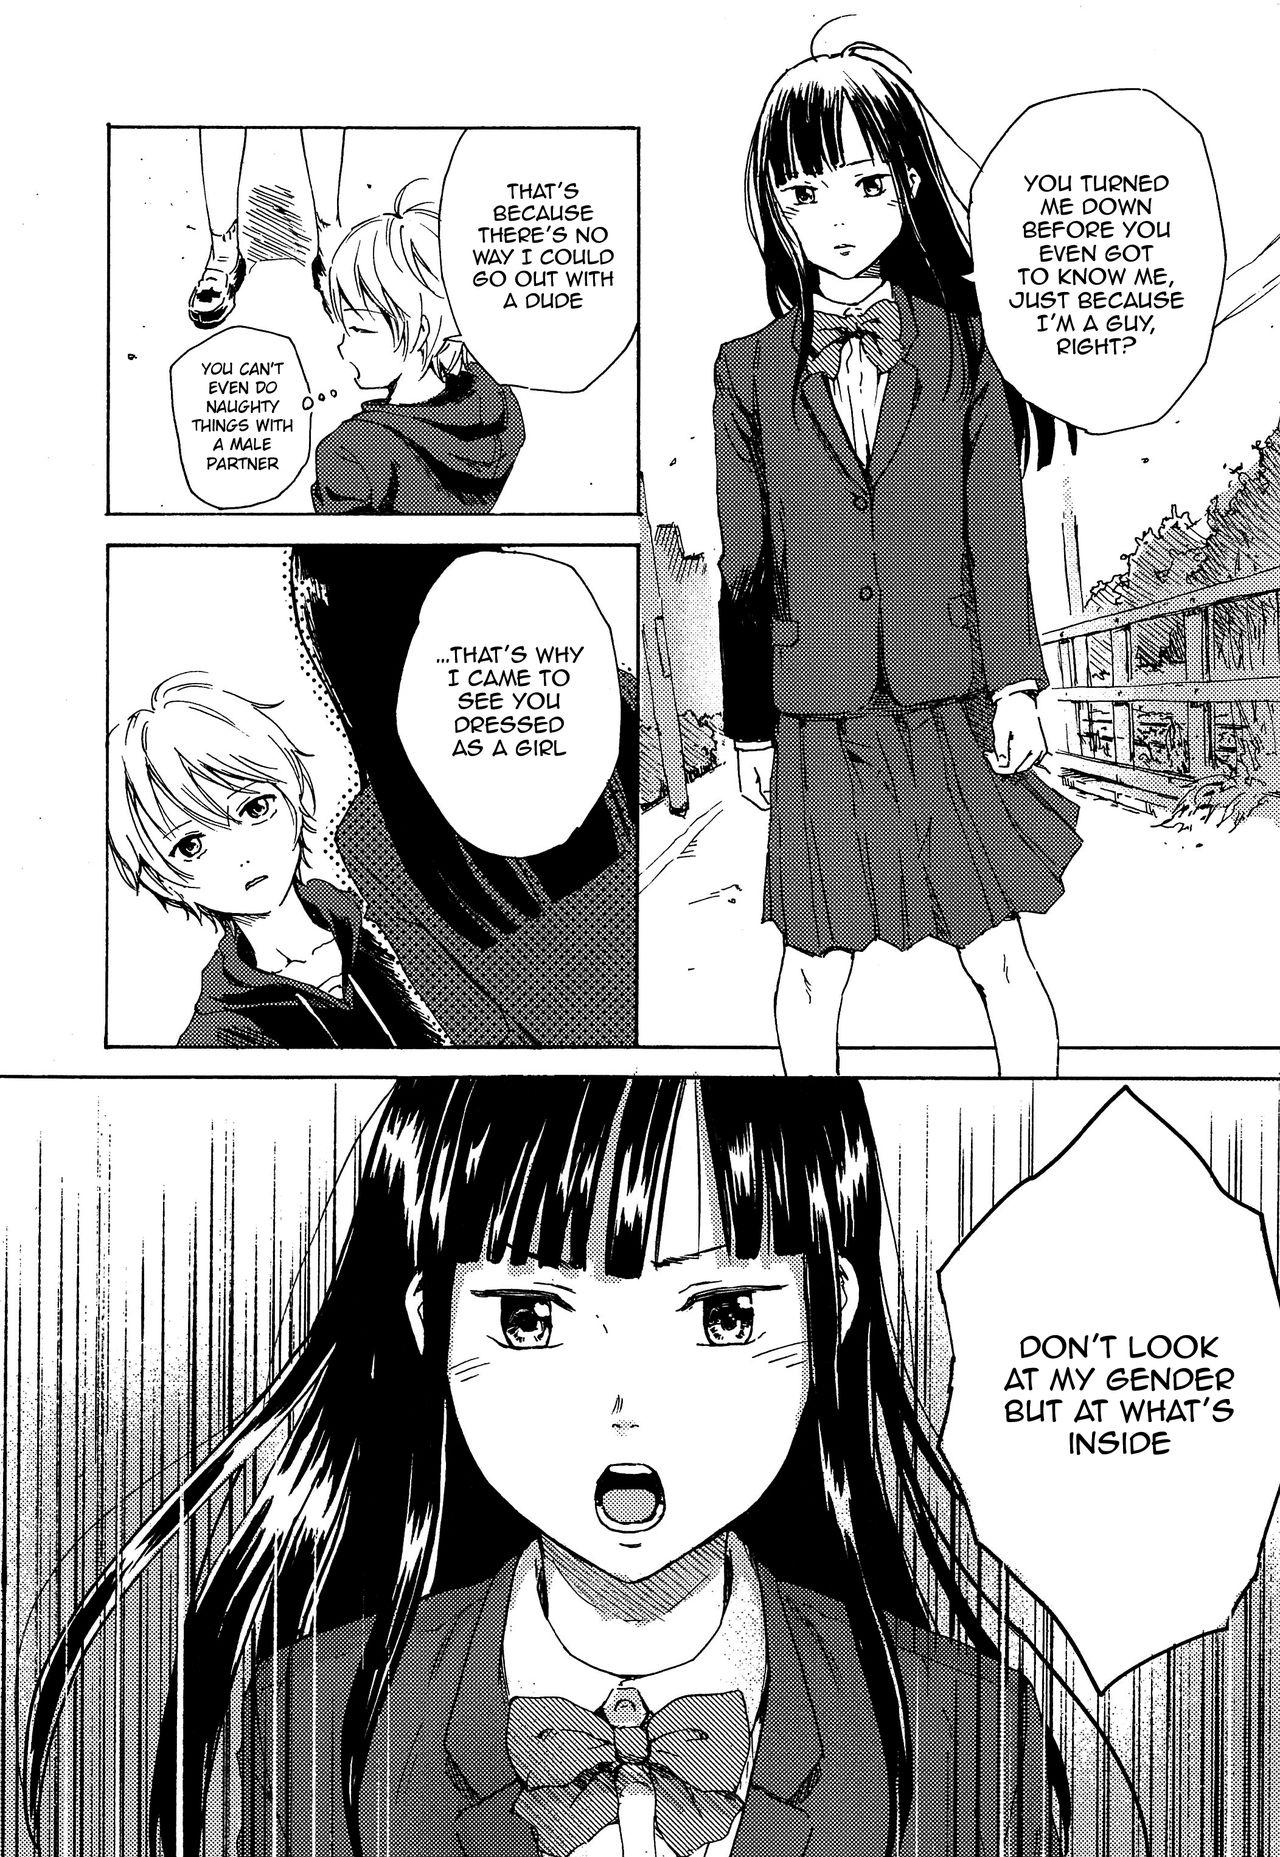 Pussy Fucking Skirt in the Kataomoi | Skirt in the Unrequited Love - Original Thot - Page 11